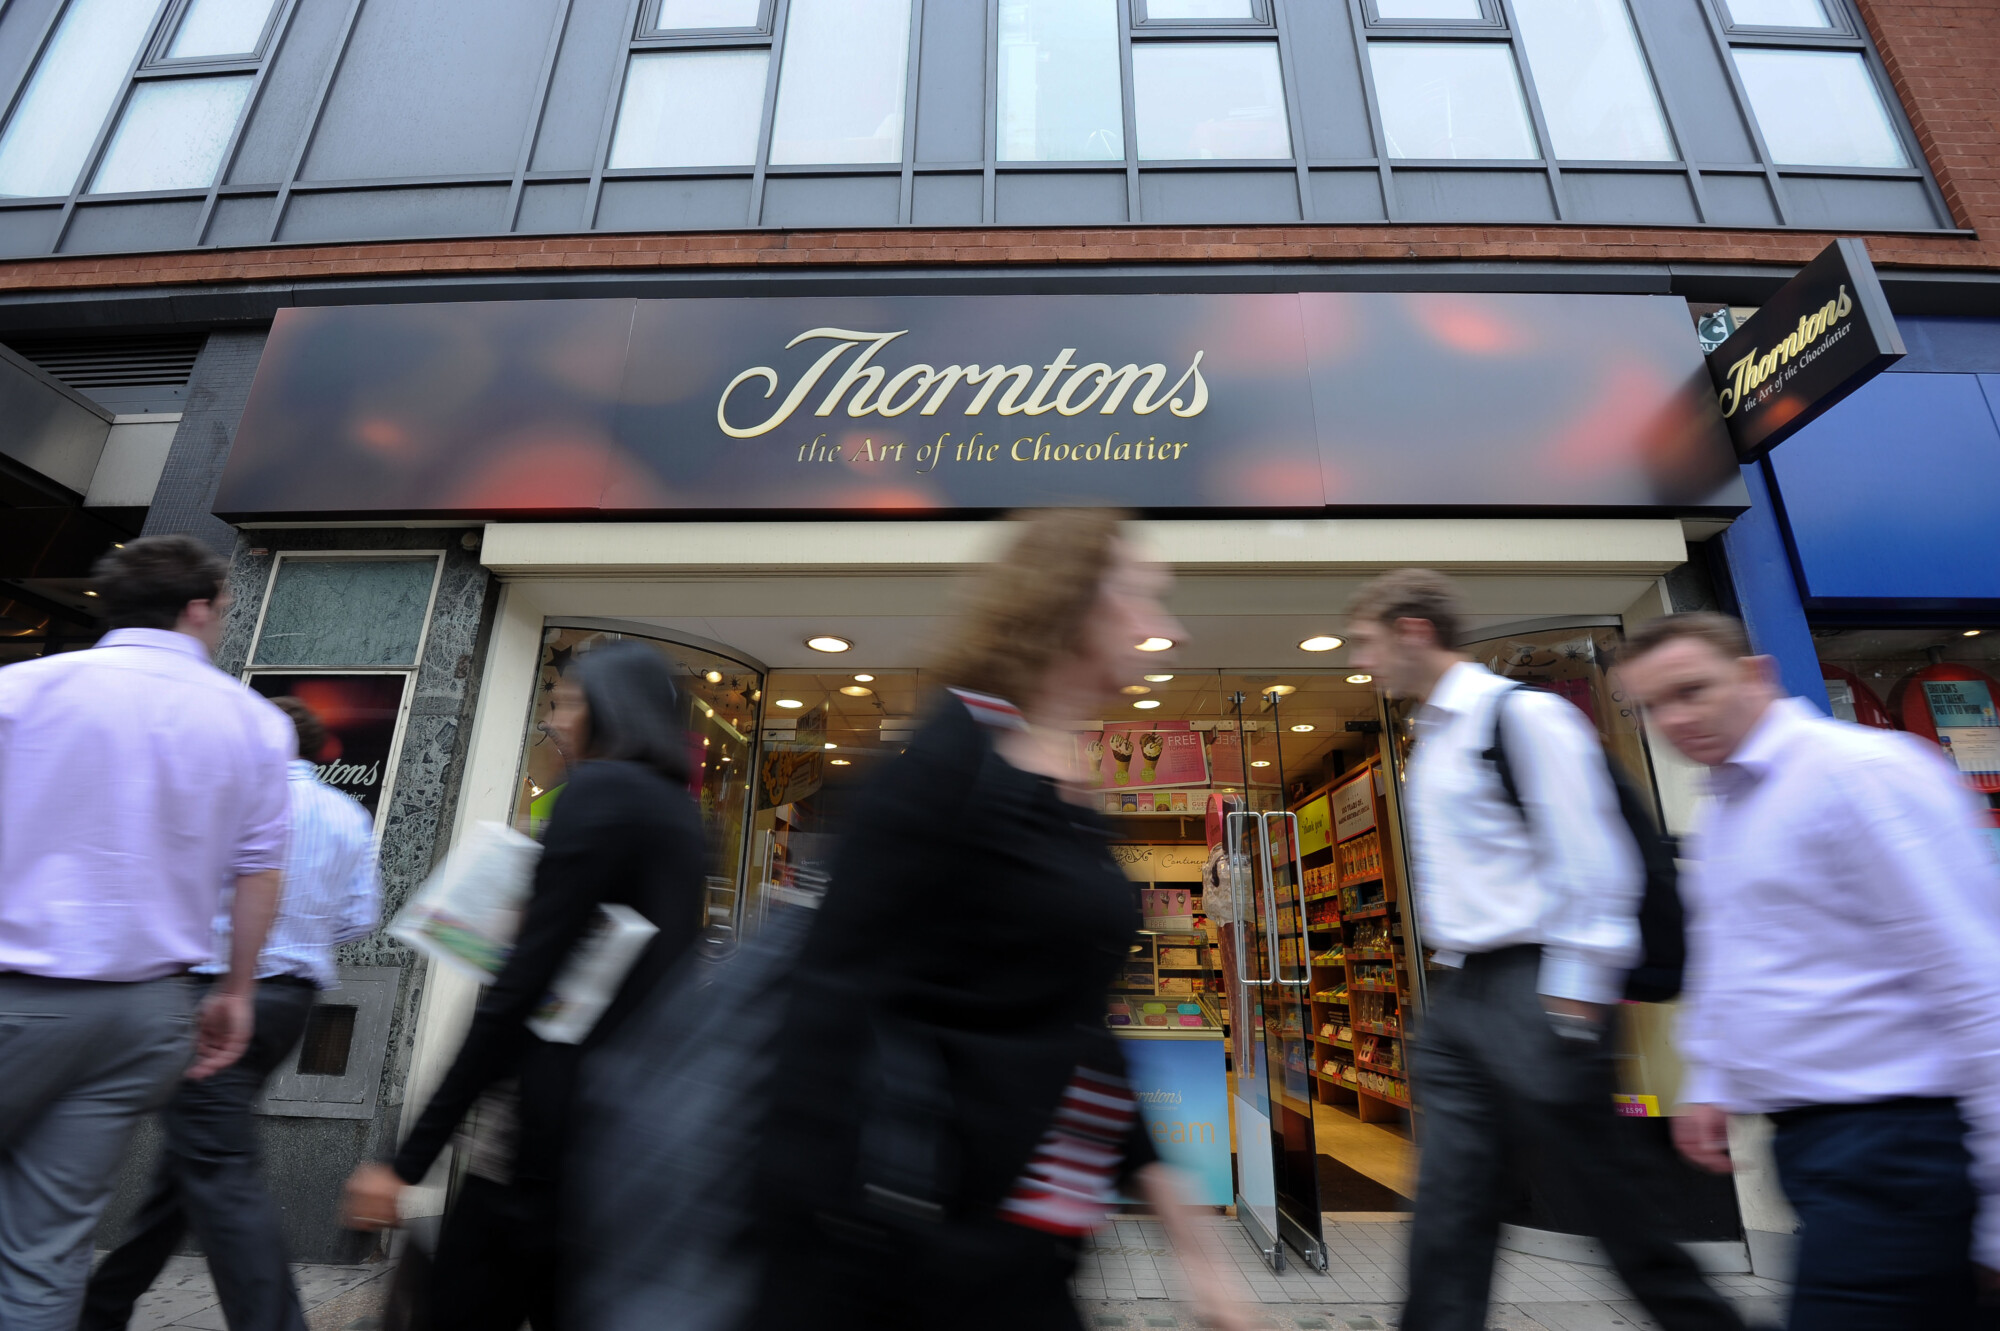 Chocolate Chain Thorntons to Close UK Stores, 600 Jobs at Risk